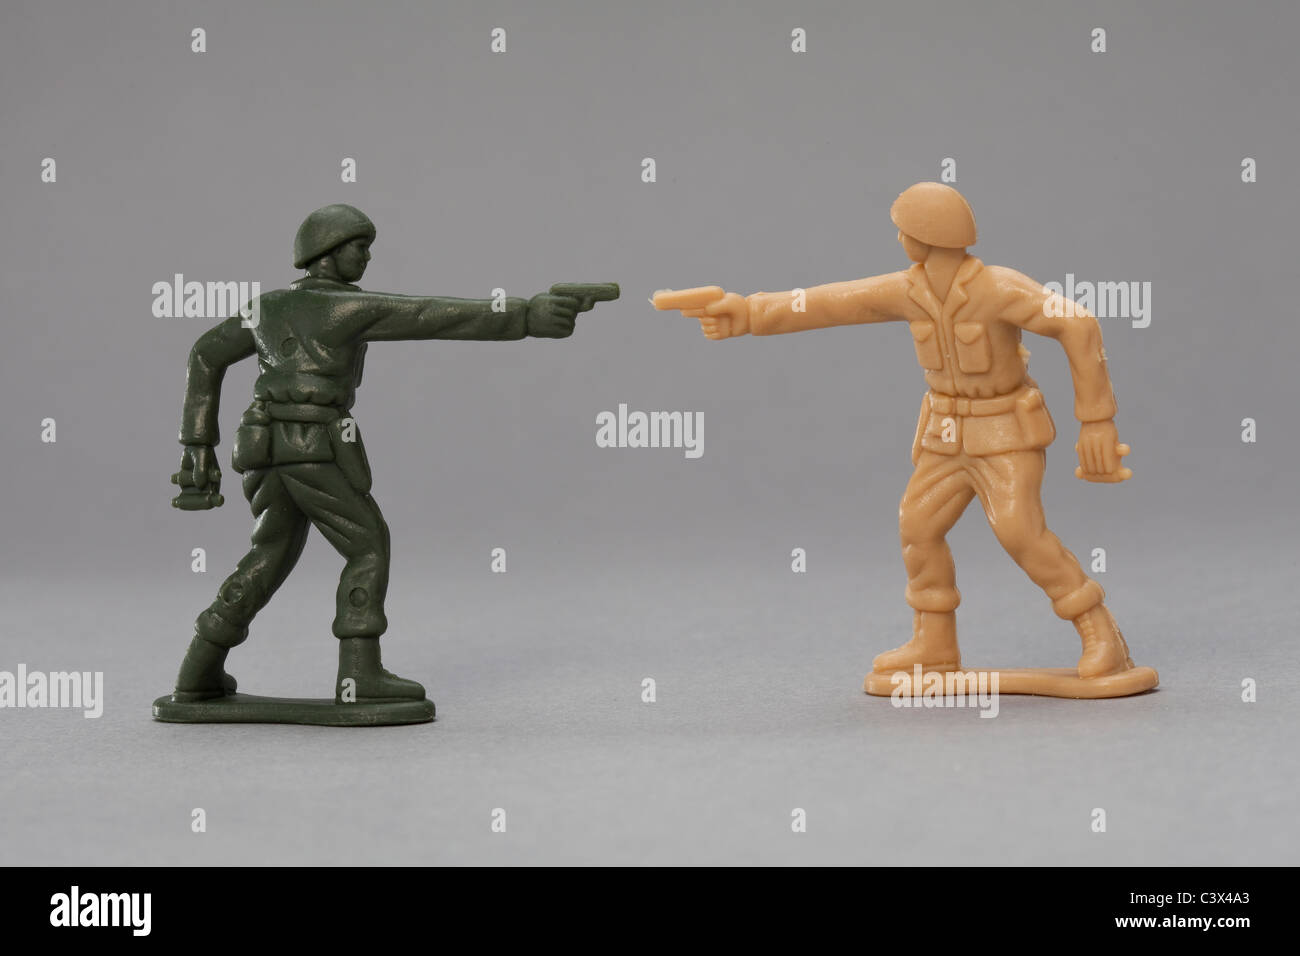 Toy Soldiers firing at each other Stock Photo